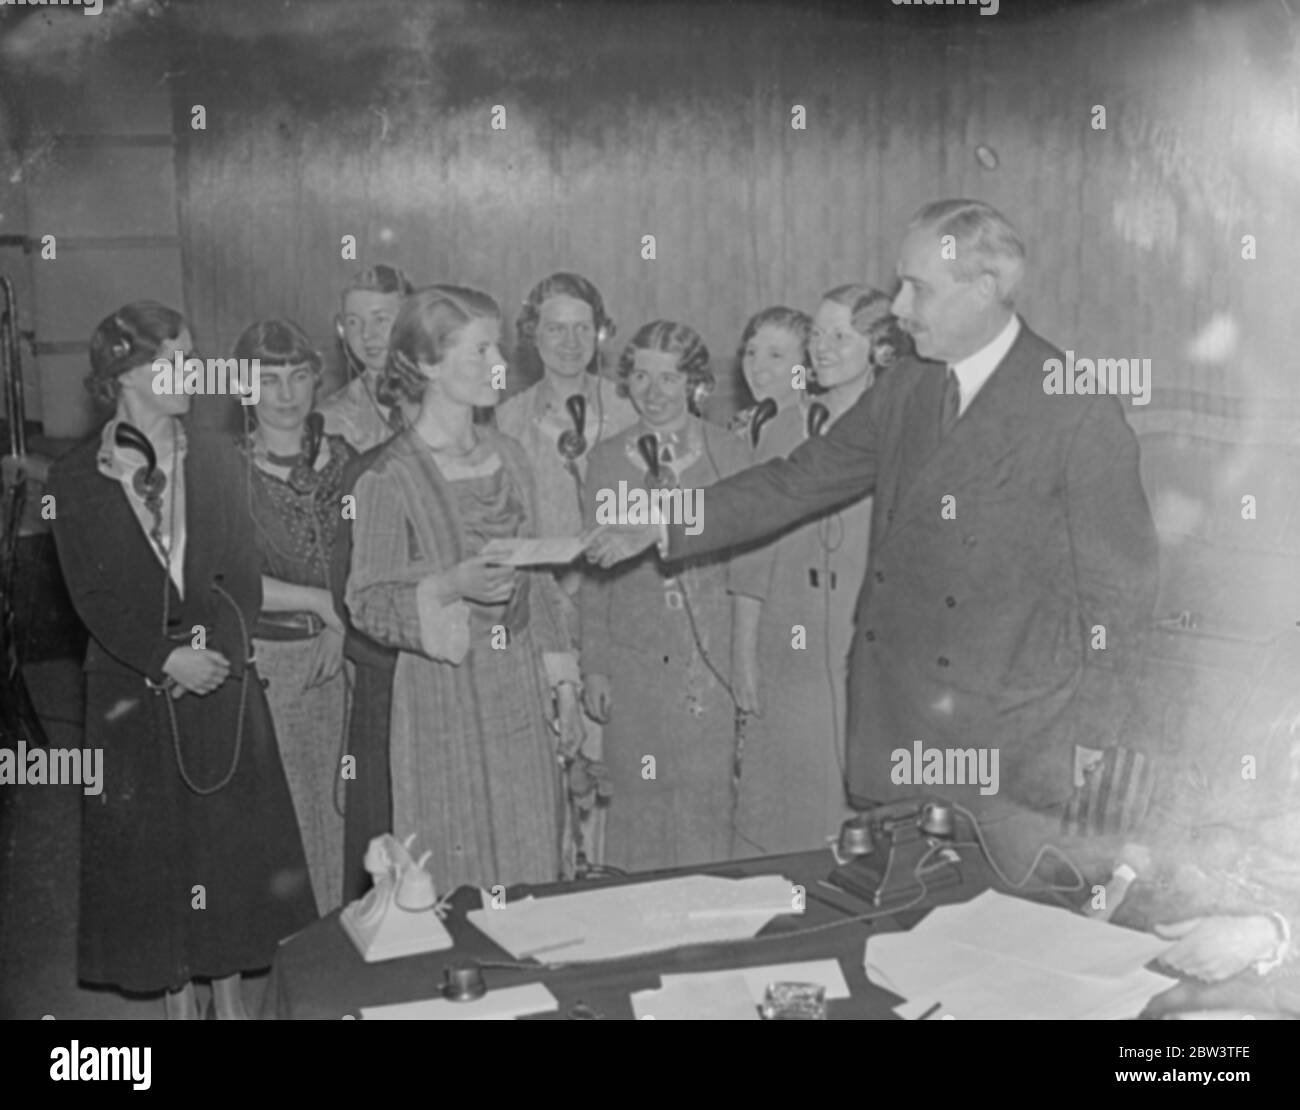 London telephone girl wins golden voice competition . M/S of Miss E. W. Cain sat at a switchboard reading poetry into the mouthpiece, other operators sit behind her. M/S of Postmaster General Major Tryon thanking the judges. M/S as the camera pans across the judges who are, Stuart Hibberd of the BBC (British Broadcasting Company / Corporation), Dame Sybil Thorndike, John Masefield, the Poet Laureate, Mrs Atkinson, chosen as the perfect telephone subscriber, and Lord Iliffe, they are all listening to Miss Cain speak through the telephone. Hibberd asks Sybil what she thinks of her voice and she Stock Photo